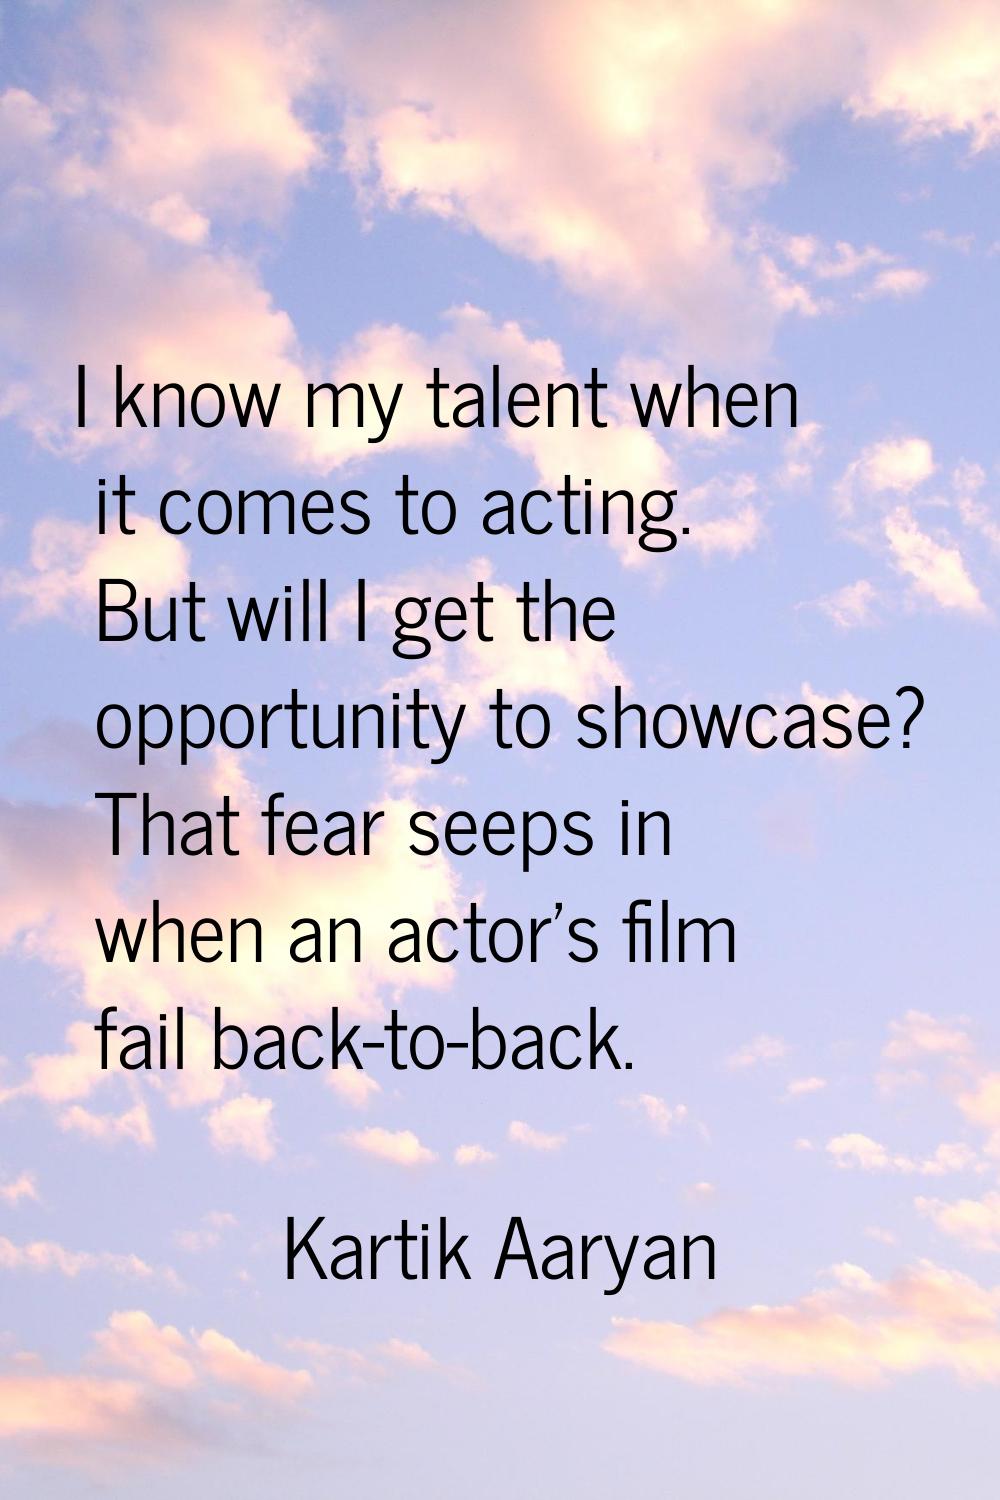 I know my talent when it comes to acting. But will I get the opportunity to showcase? That fear see